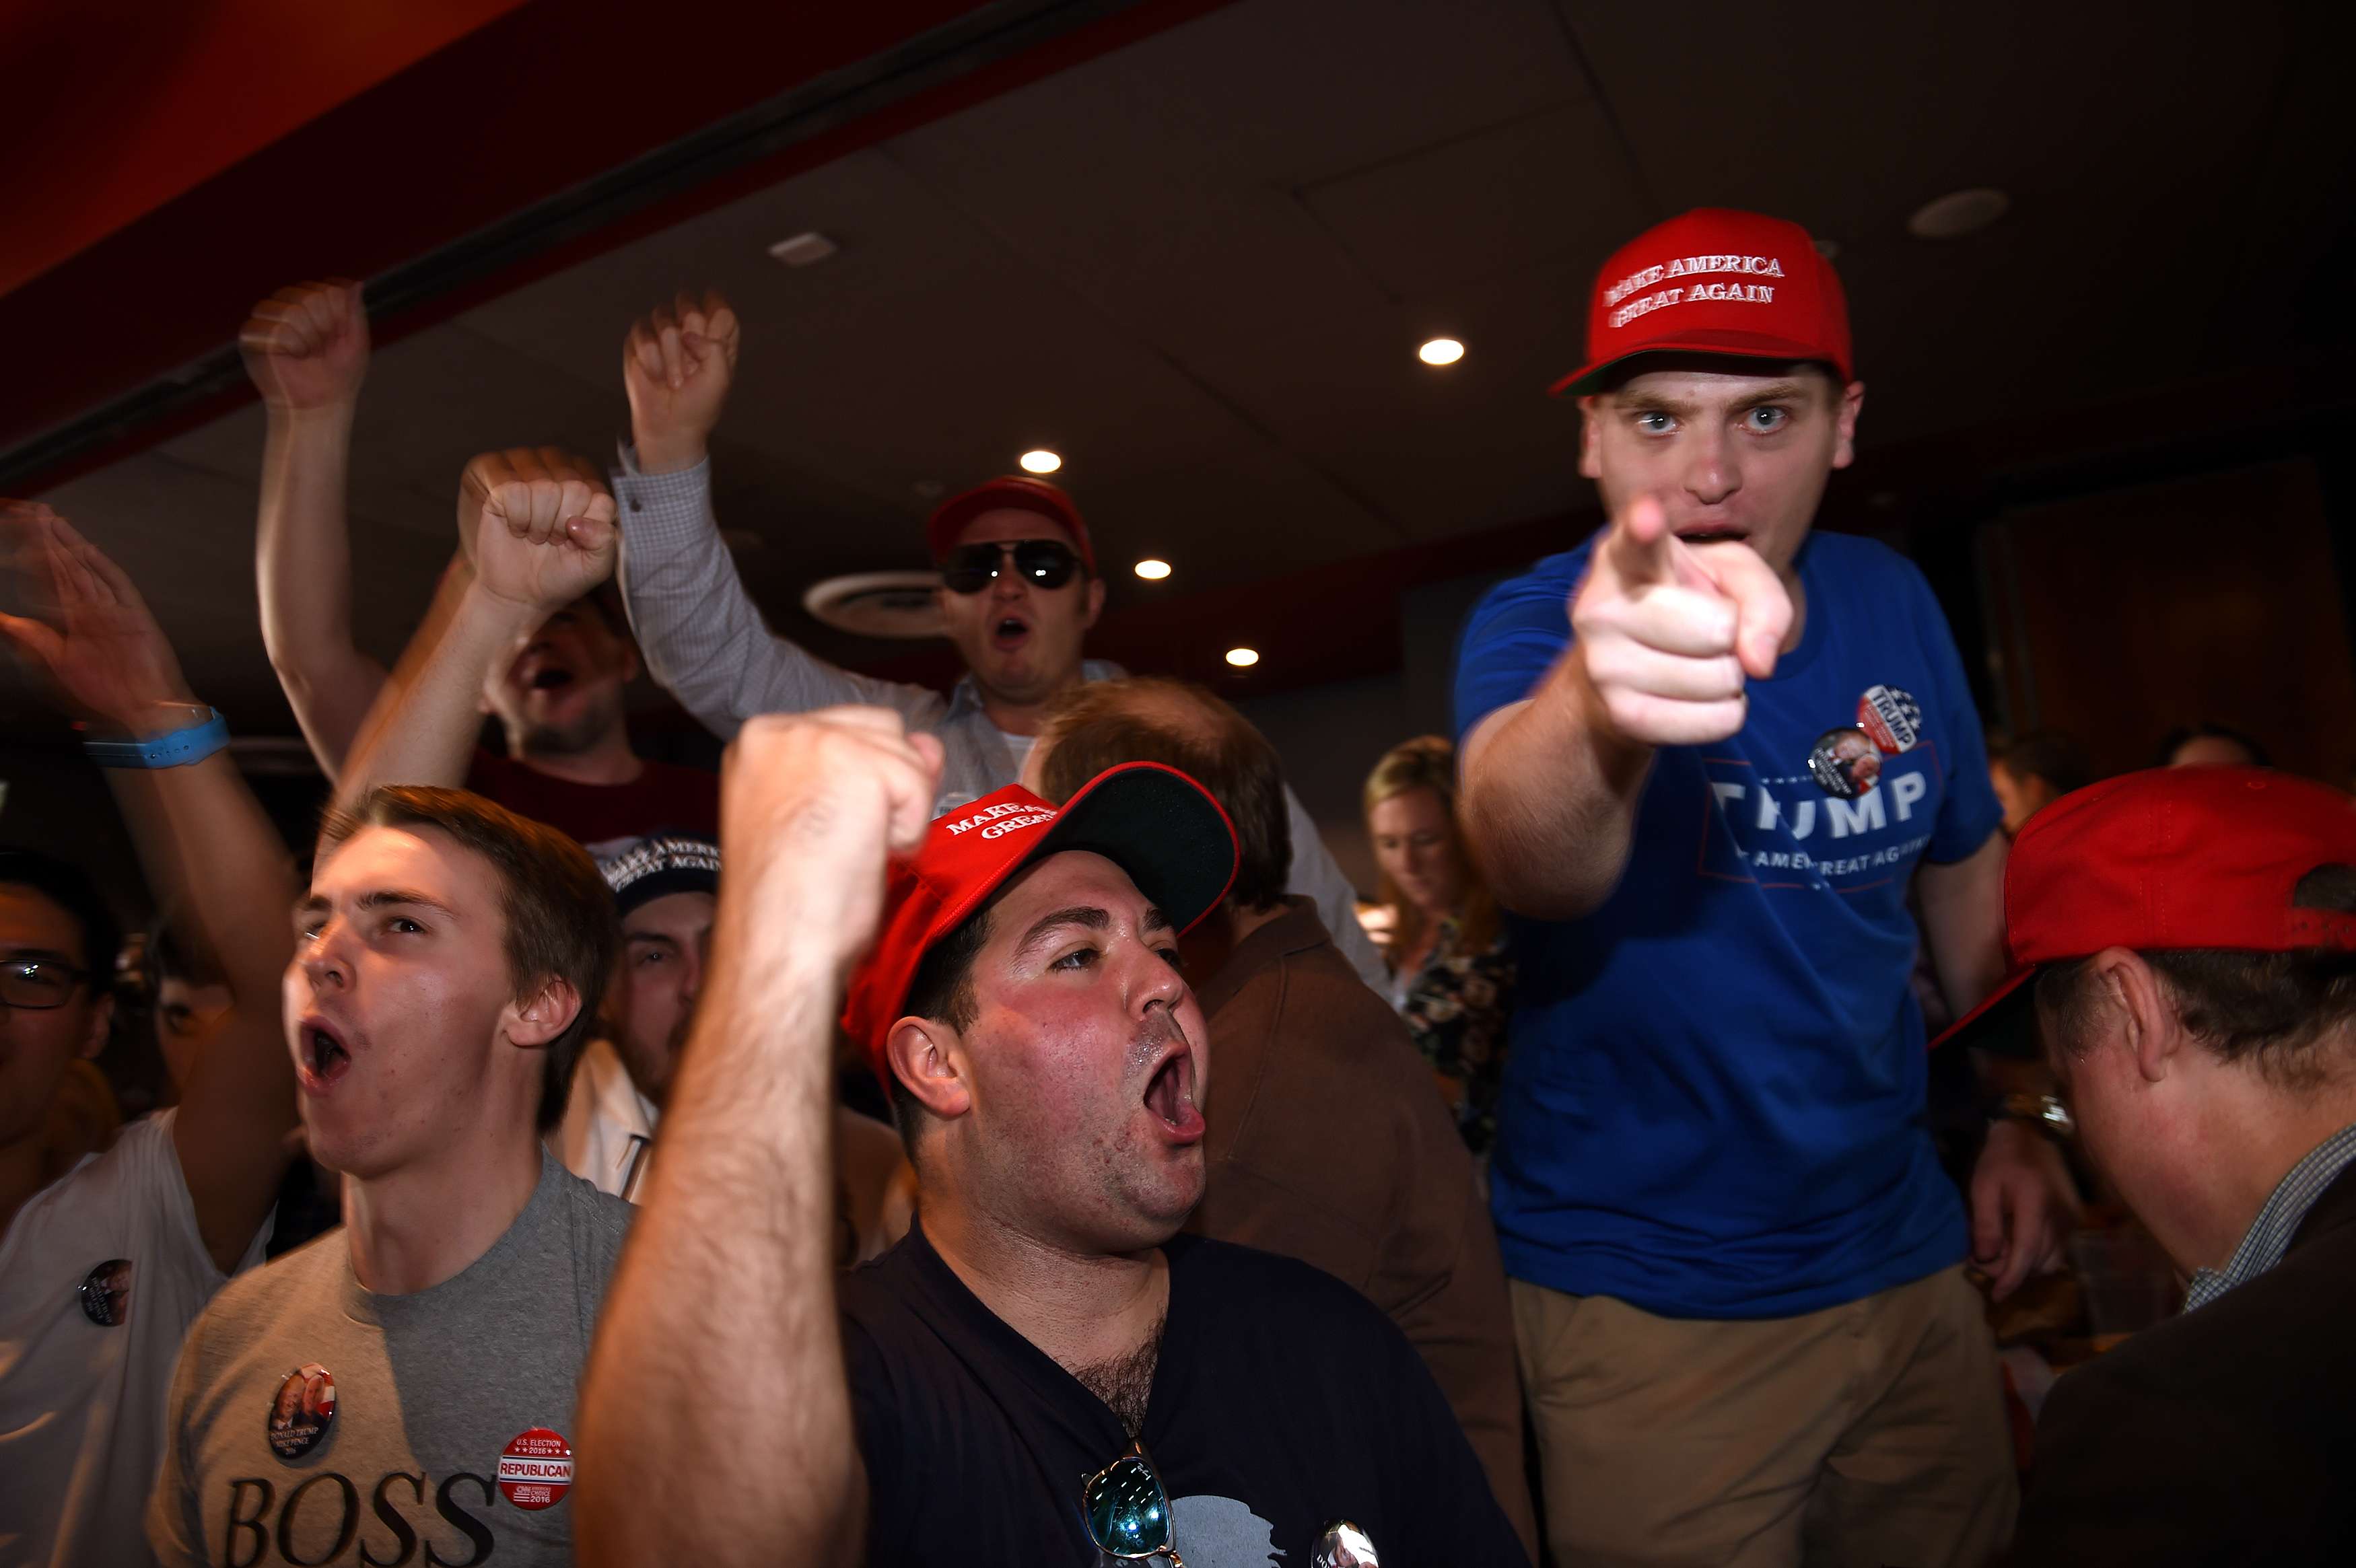 Donald Trump supporters celebrate his victory in the US election at the University of Sydney, Australia. Photo: AFP